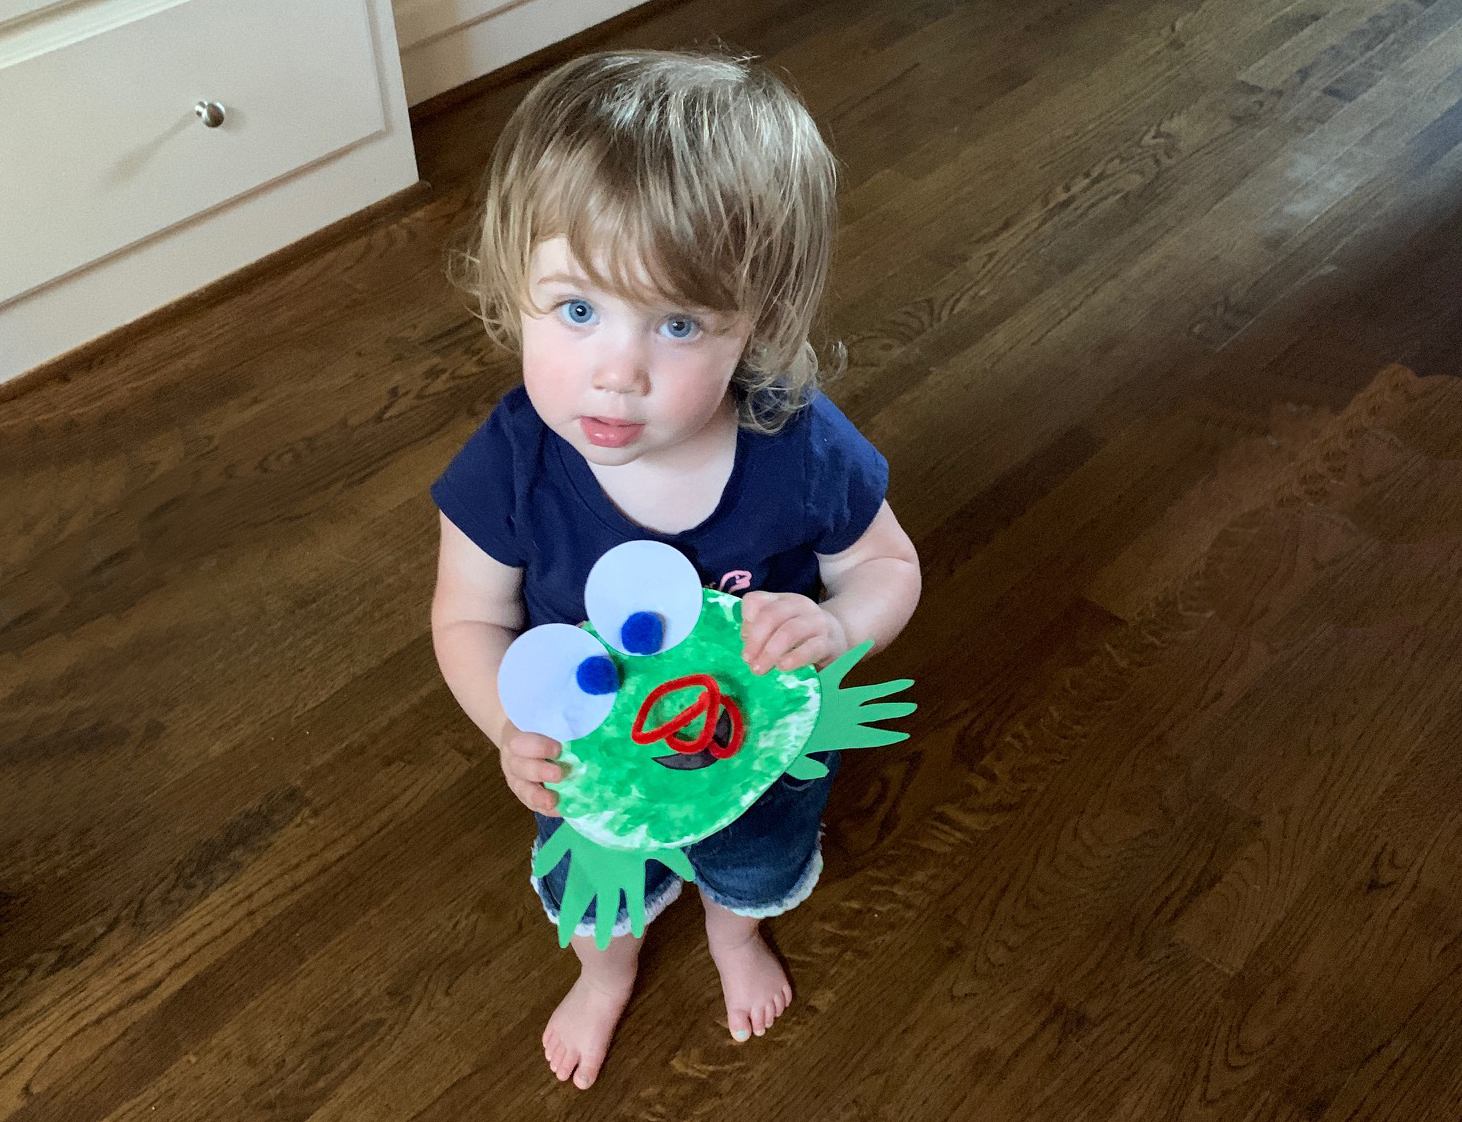 Child with completed frog craft